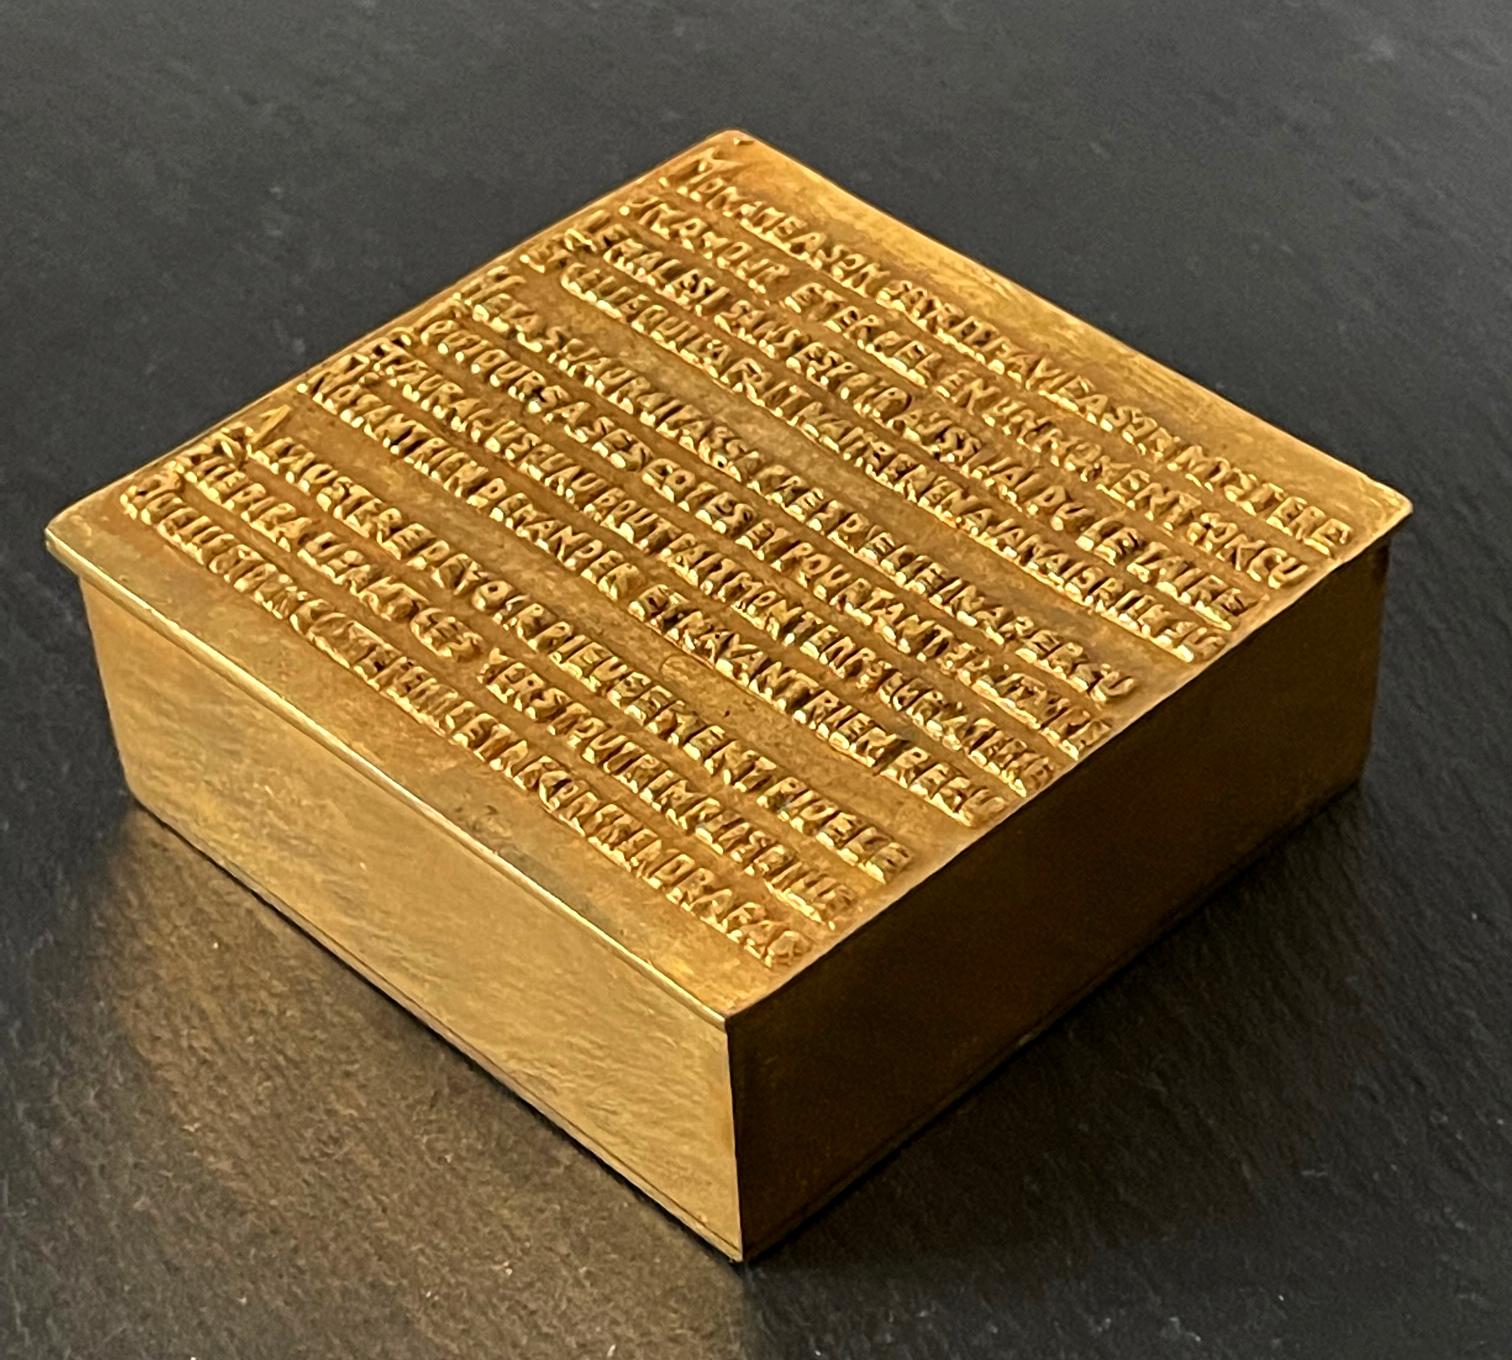 A wonderful jewelry box in gilt cast bronze by Parisian art jeweler Line Vautrin (1913-1997). From a small special series, the designer created circa 1945-55. on which some French poems were cast in relief on the cover. This box features a